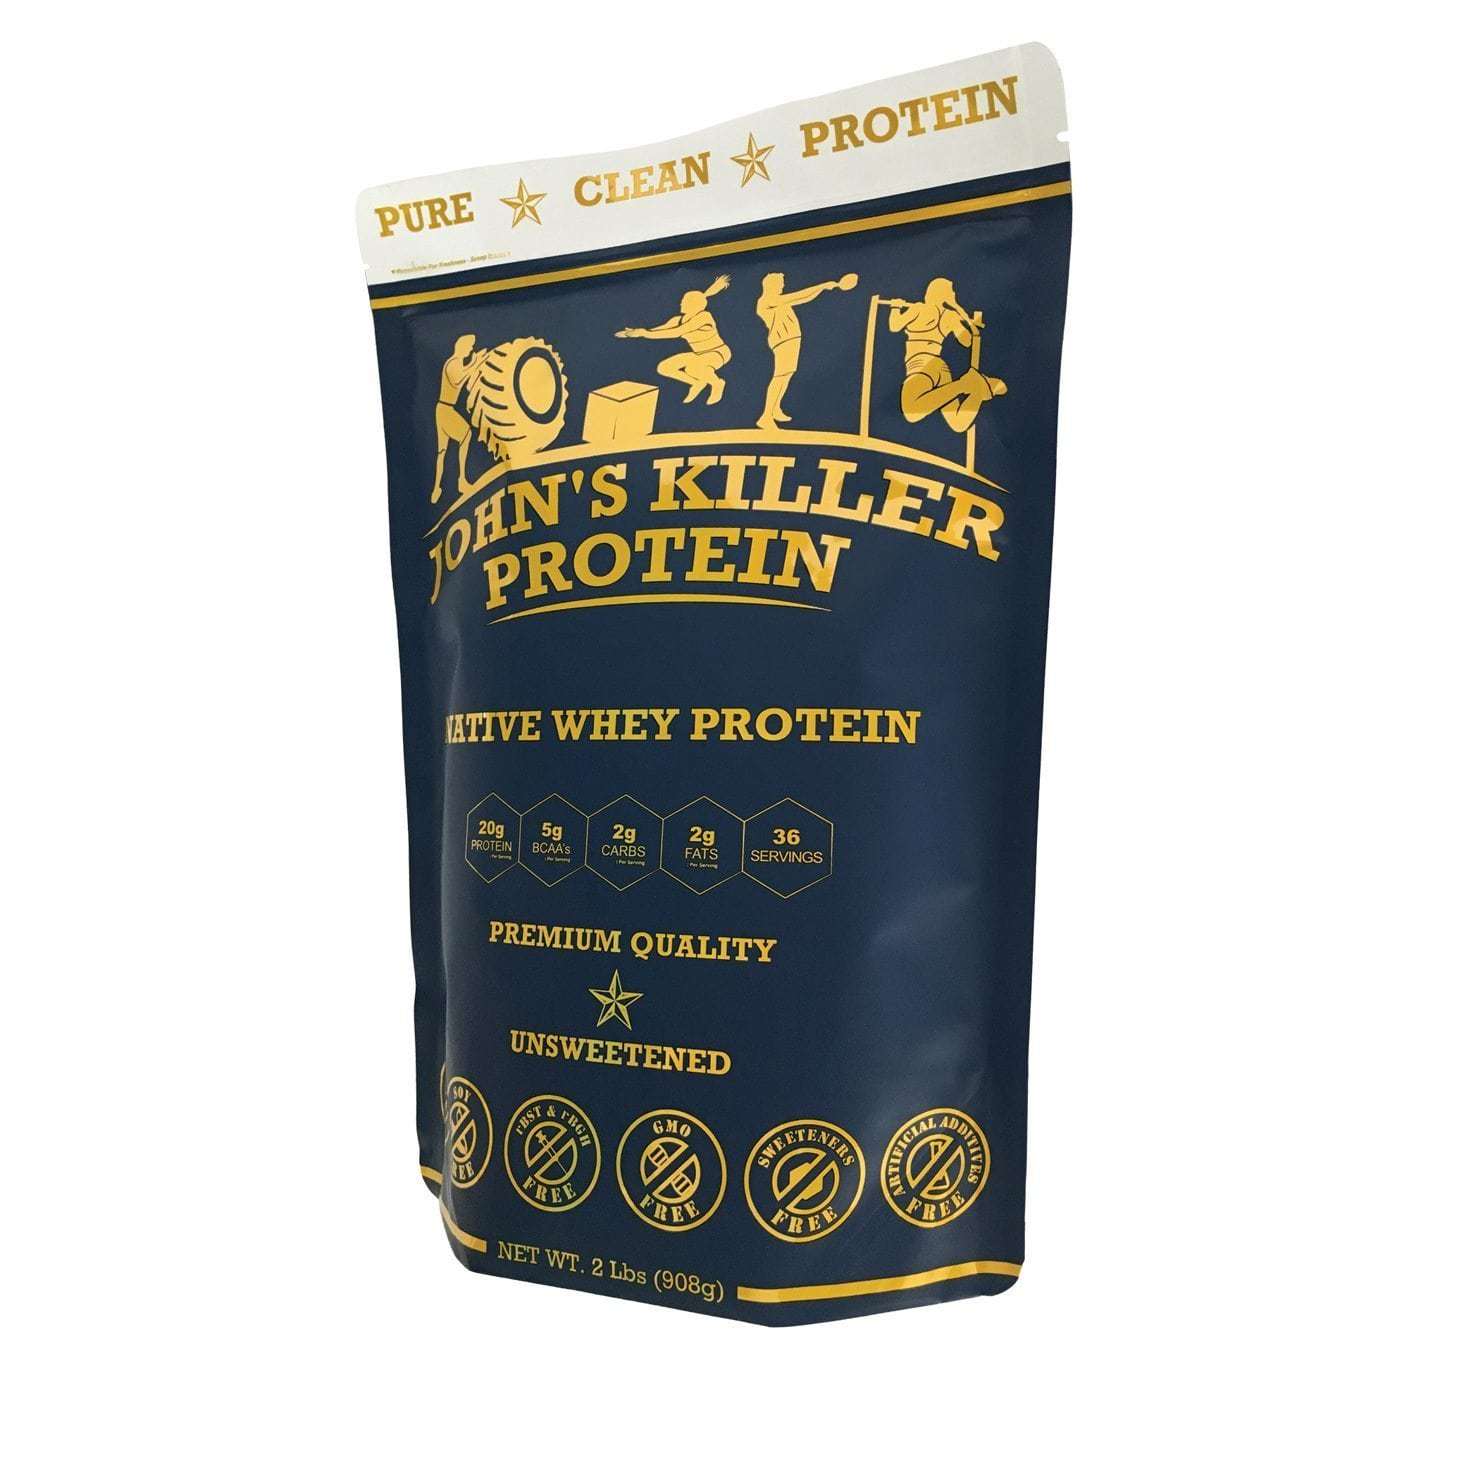 Unsweetened grass fed native whey protein - John's Killer Protein®